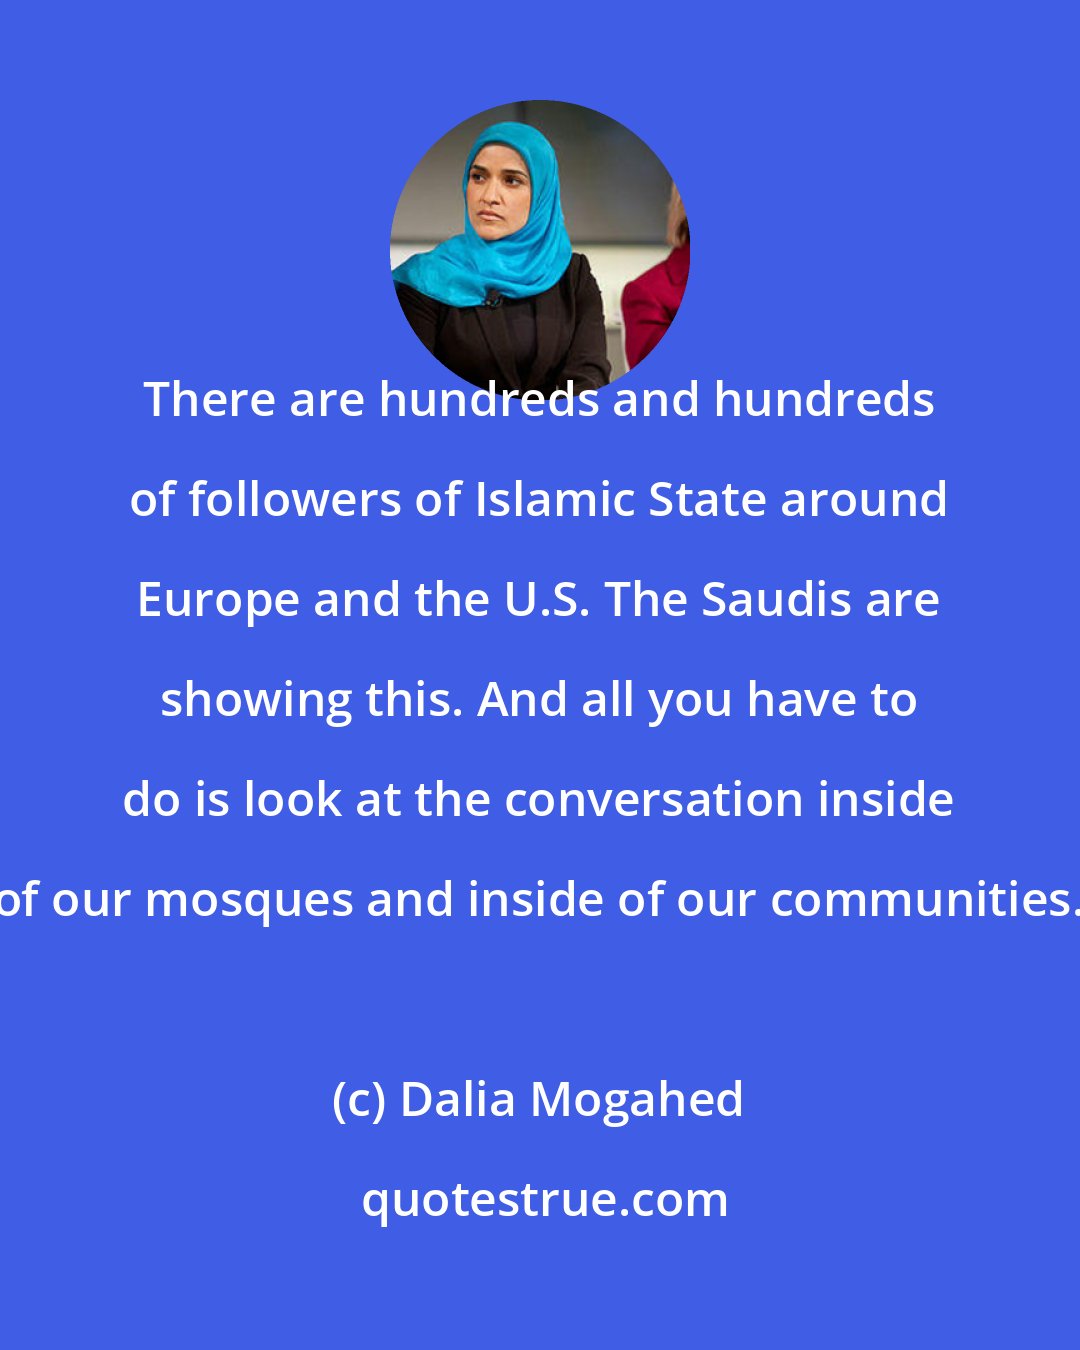 Dalia Mogahed: There are hundreds and hundreds of followers of Islamic State around Europe and the U.S. The Saudis are showing this. And all you have to do is look at the conversation inside of our mosques and inside of our communities.